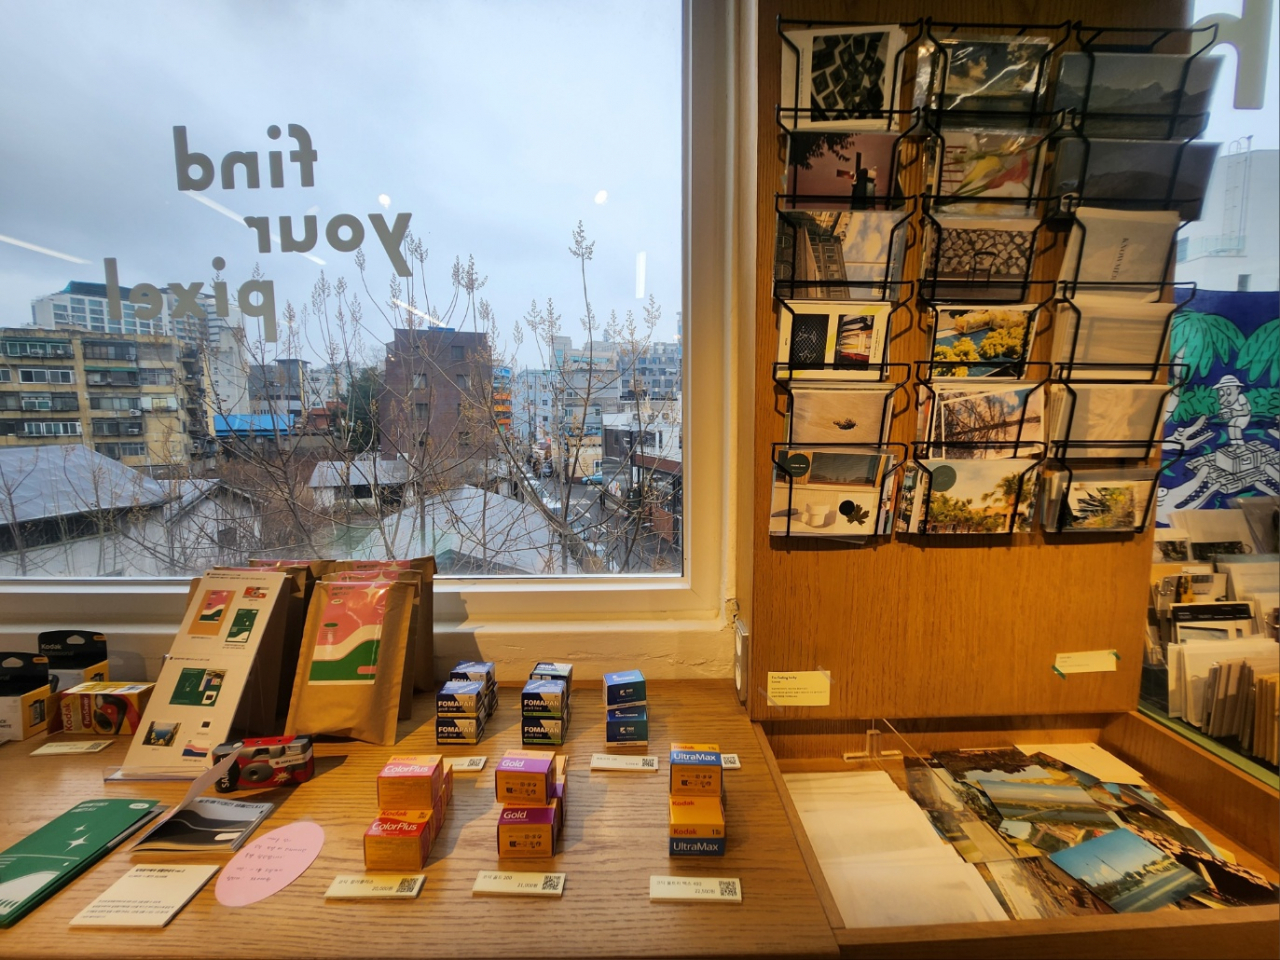 Postcards and film boxes are on display at Pixel Per Inch, an independent bookstore and vintage photo and camera shop. (Lee Jung-youn/The Korea Herald)